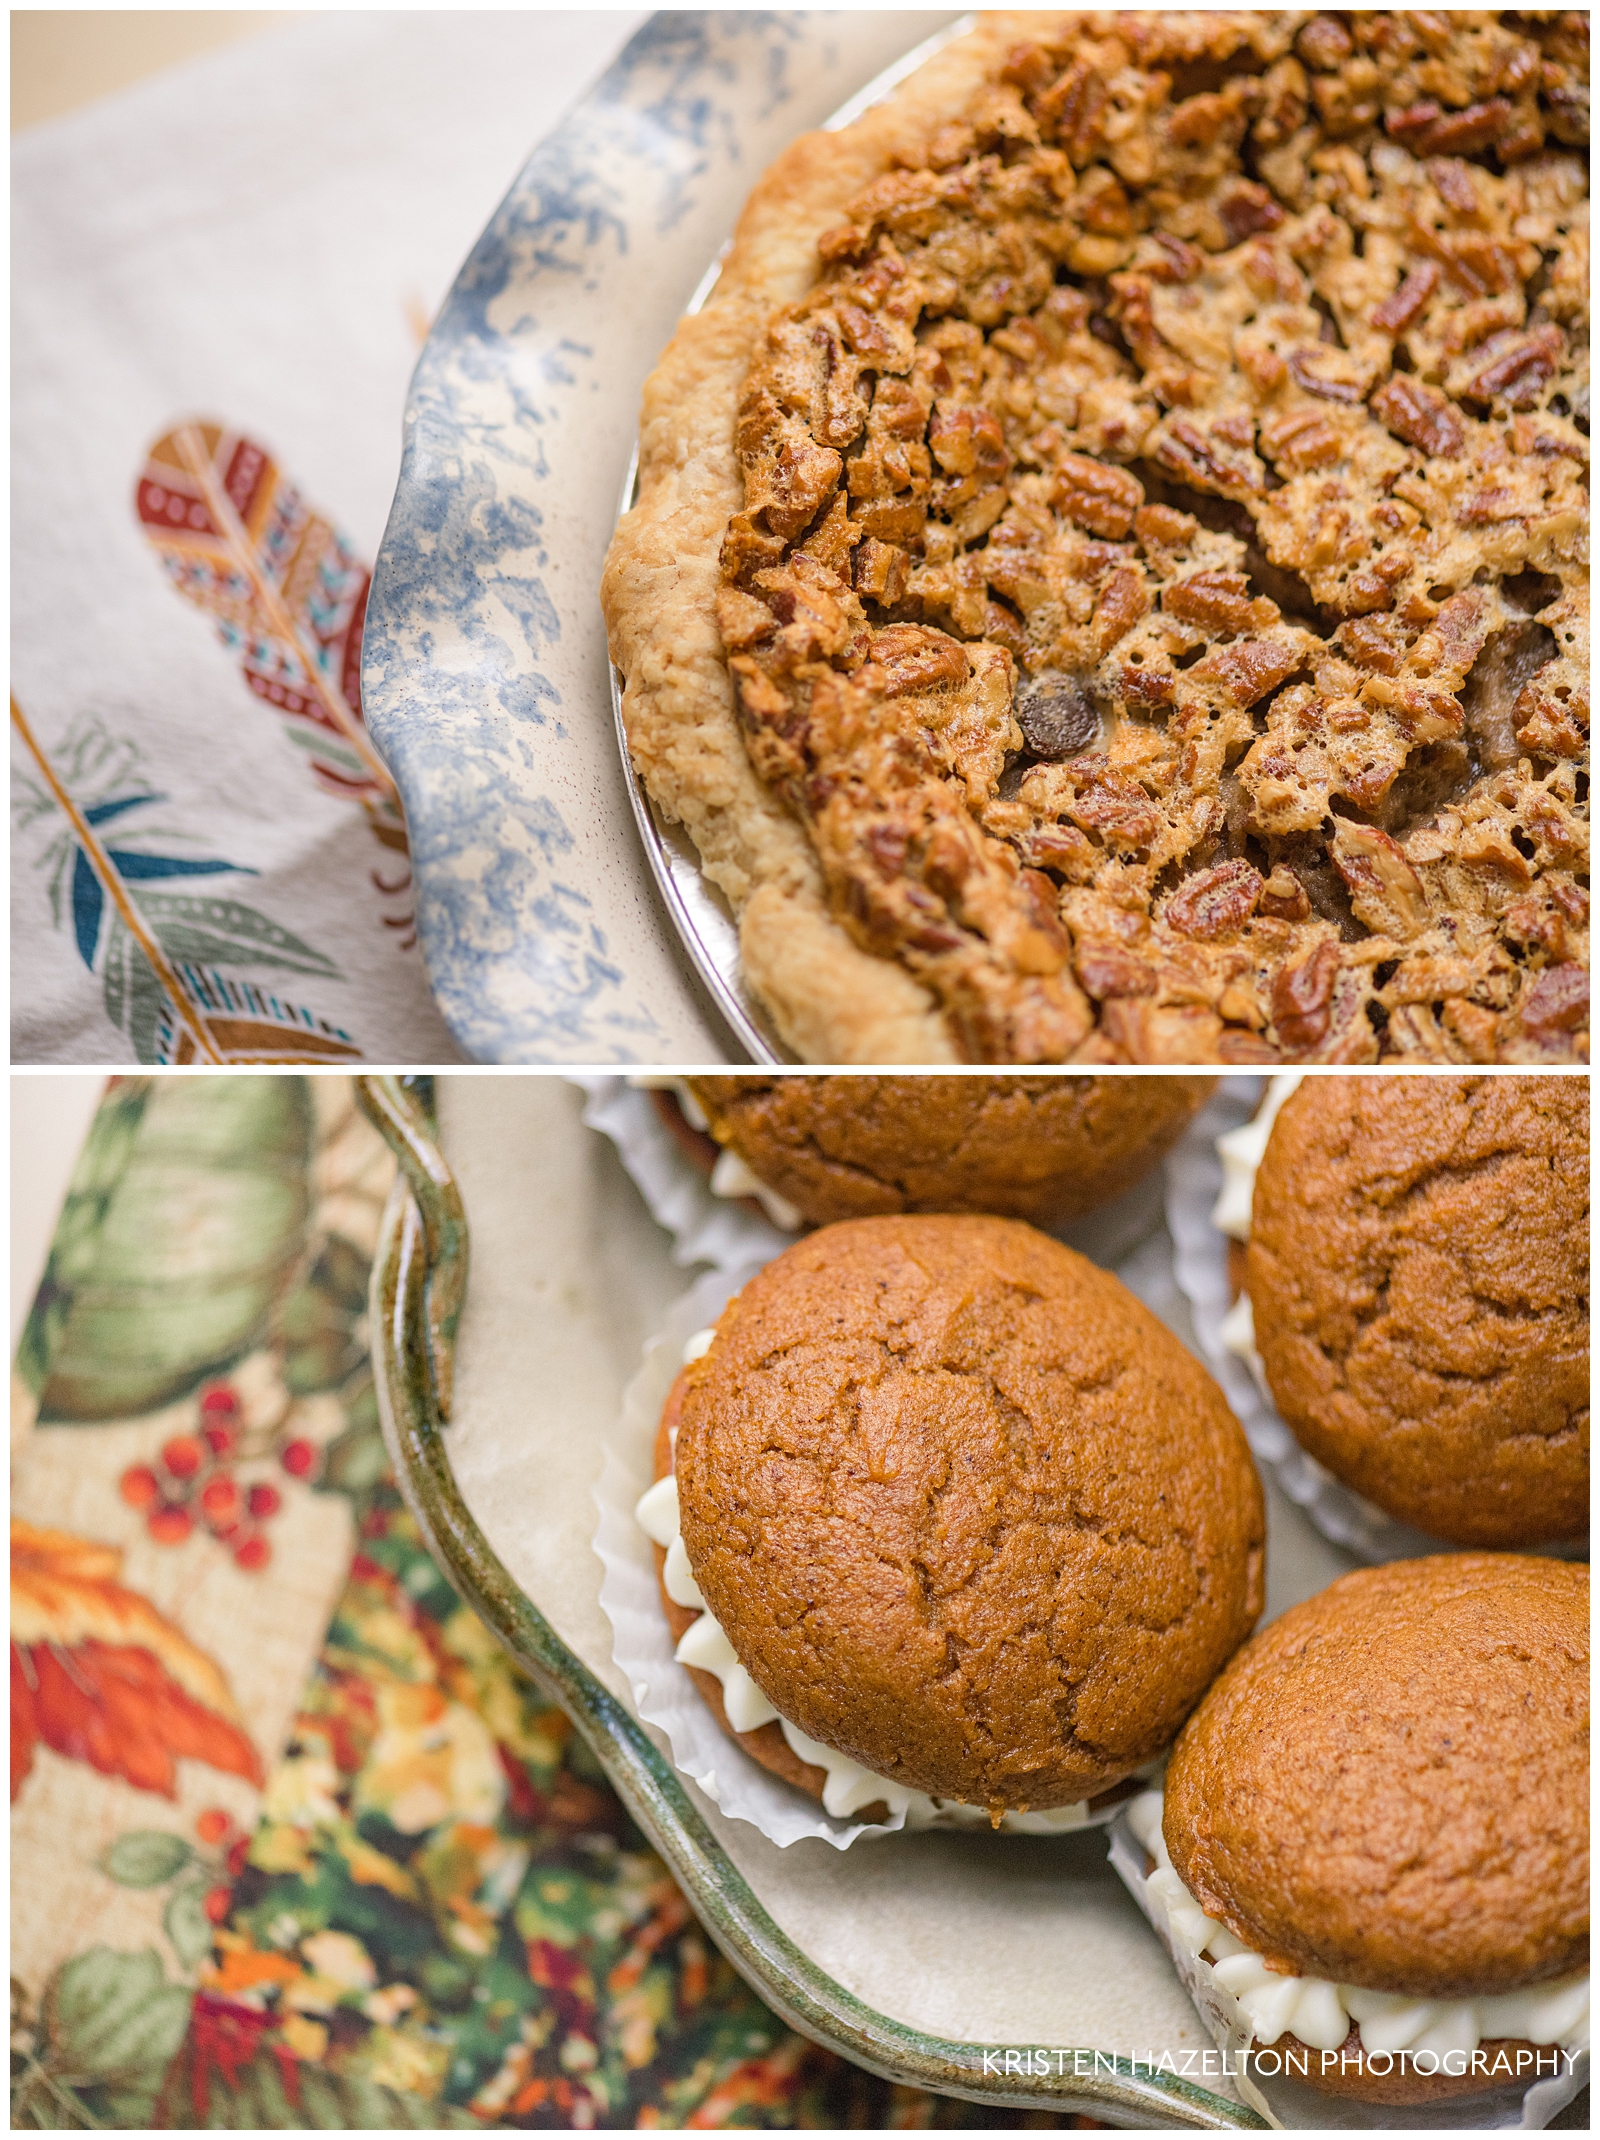 Chocolate bourbon pecan pie and pumpkin whoopie pies for Thanksgiving